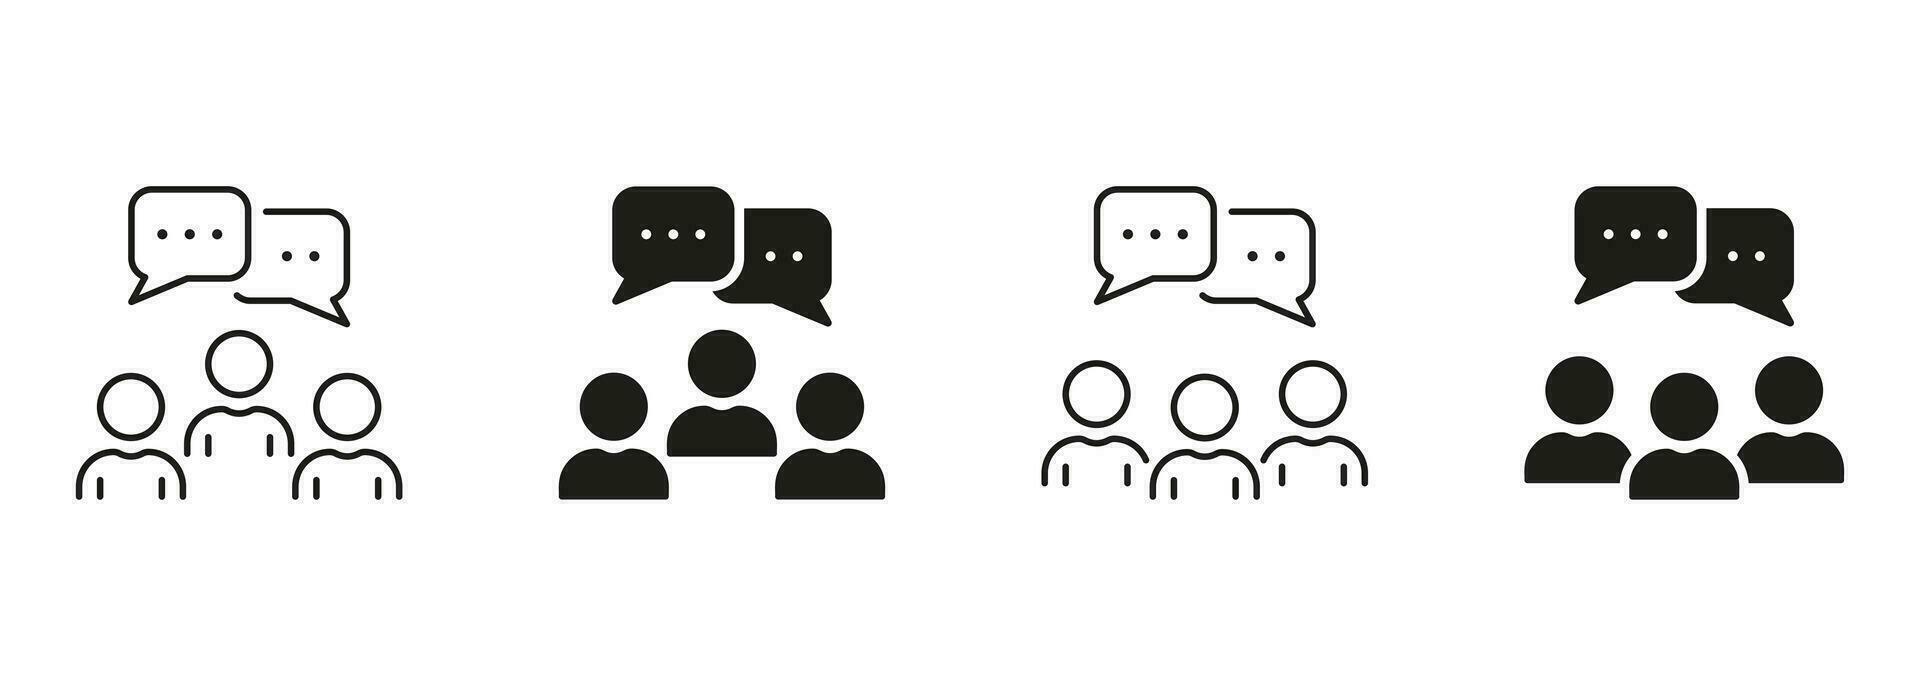 Social Communication Line and Silhouette Icon Set. Speak At Meeting Pictogram. Business Discussion Symbol Collection. Work Community Sign. People With Speech Bubble. Isolated Vector Illustration.